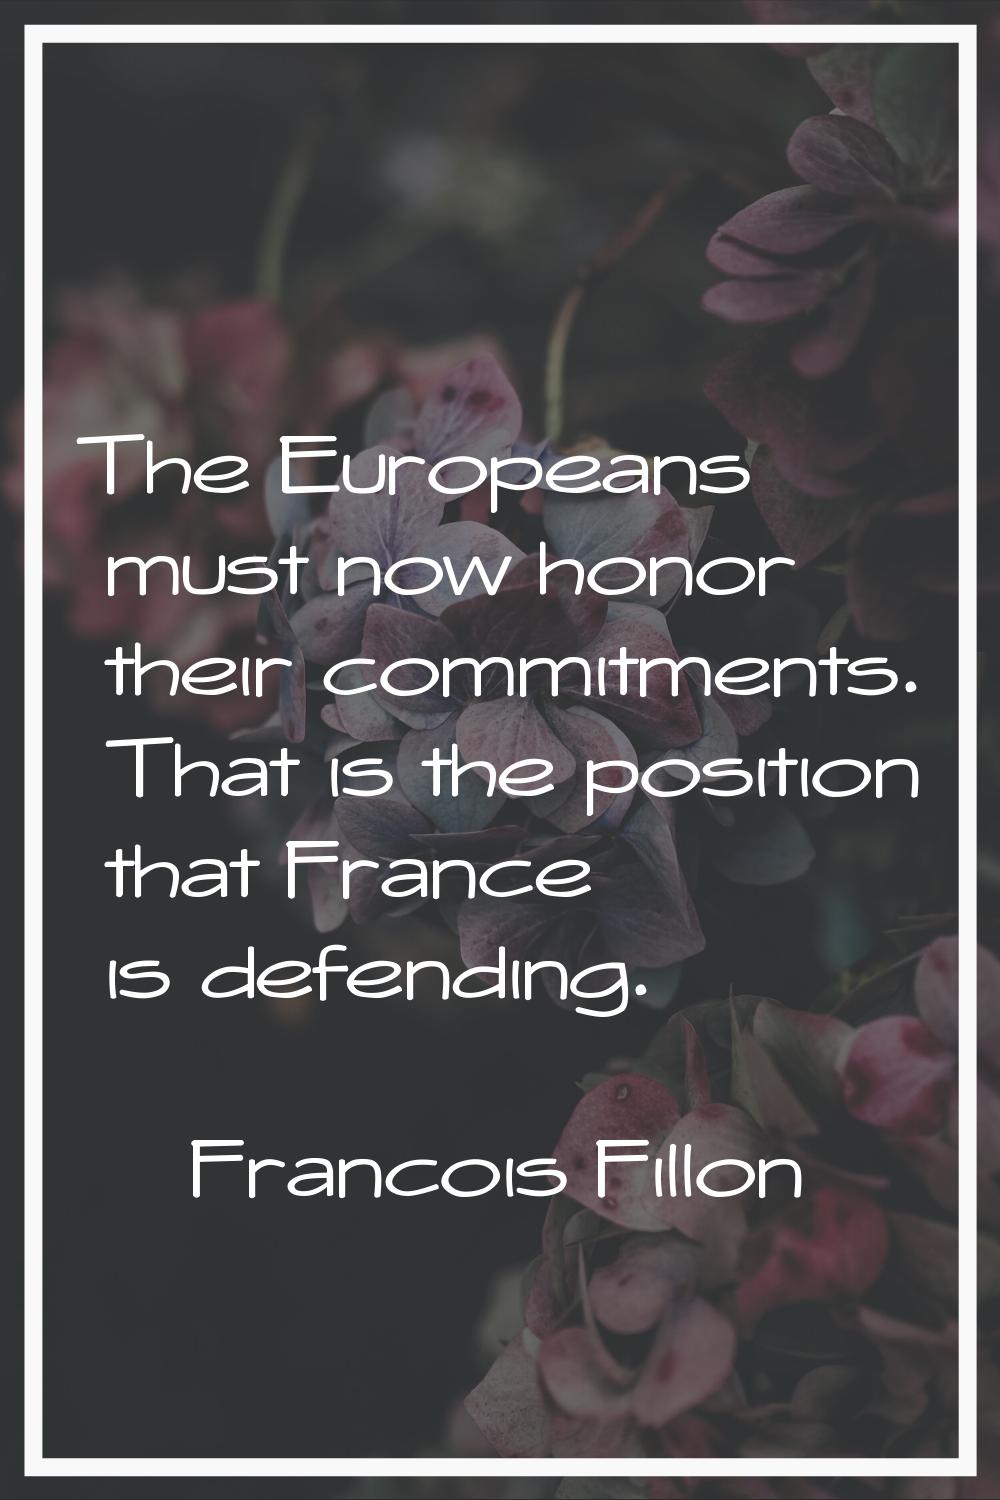 The Europeans must now honor their commitments. That is the position that France is defending.